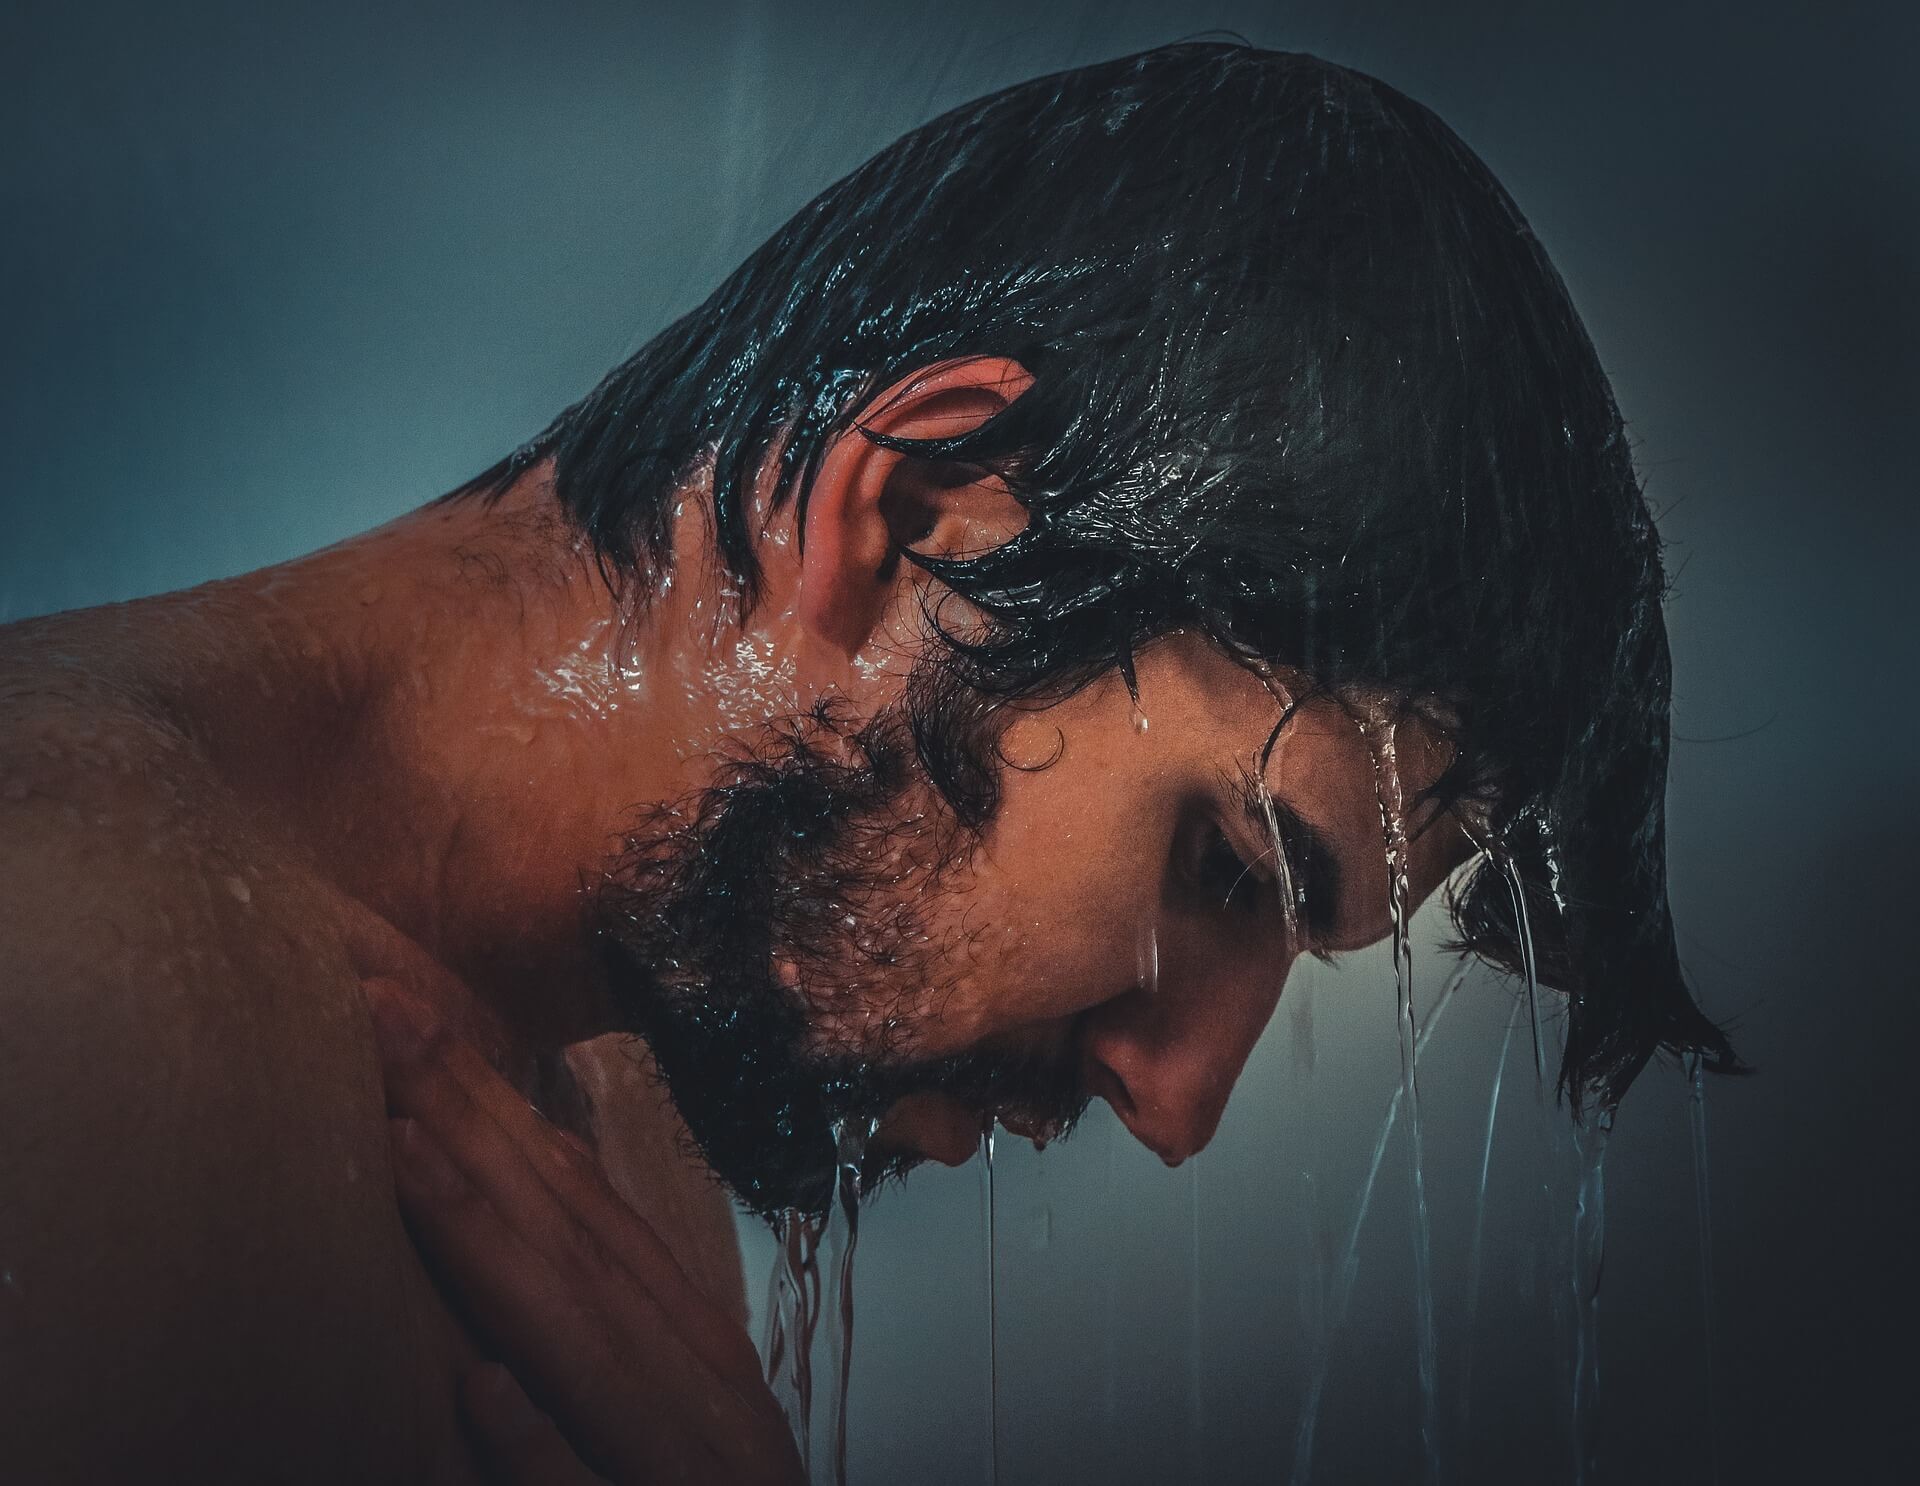 Man with dark hair and beard in shower